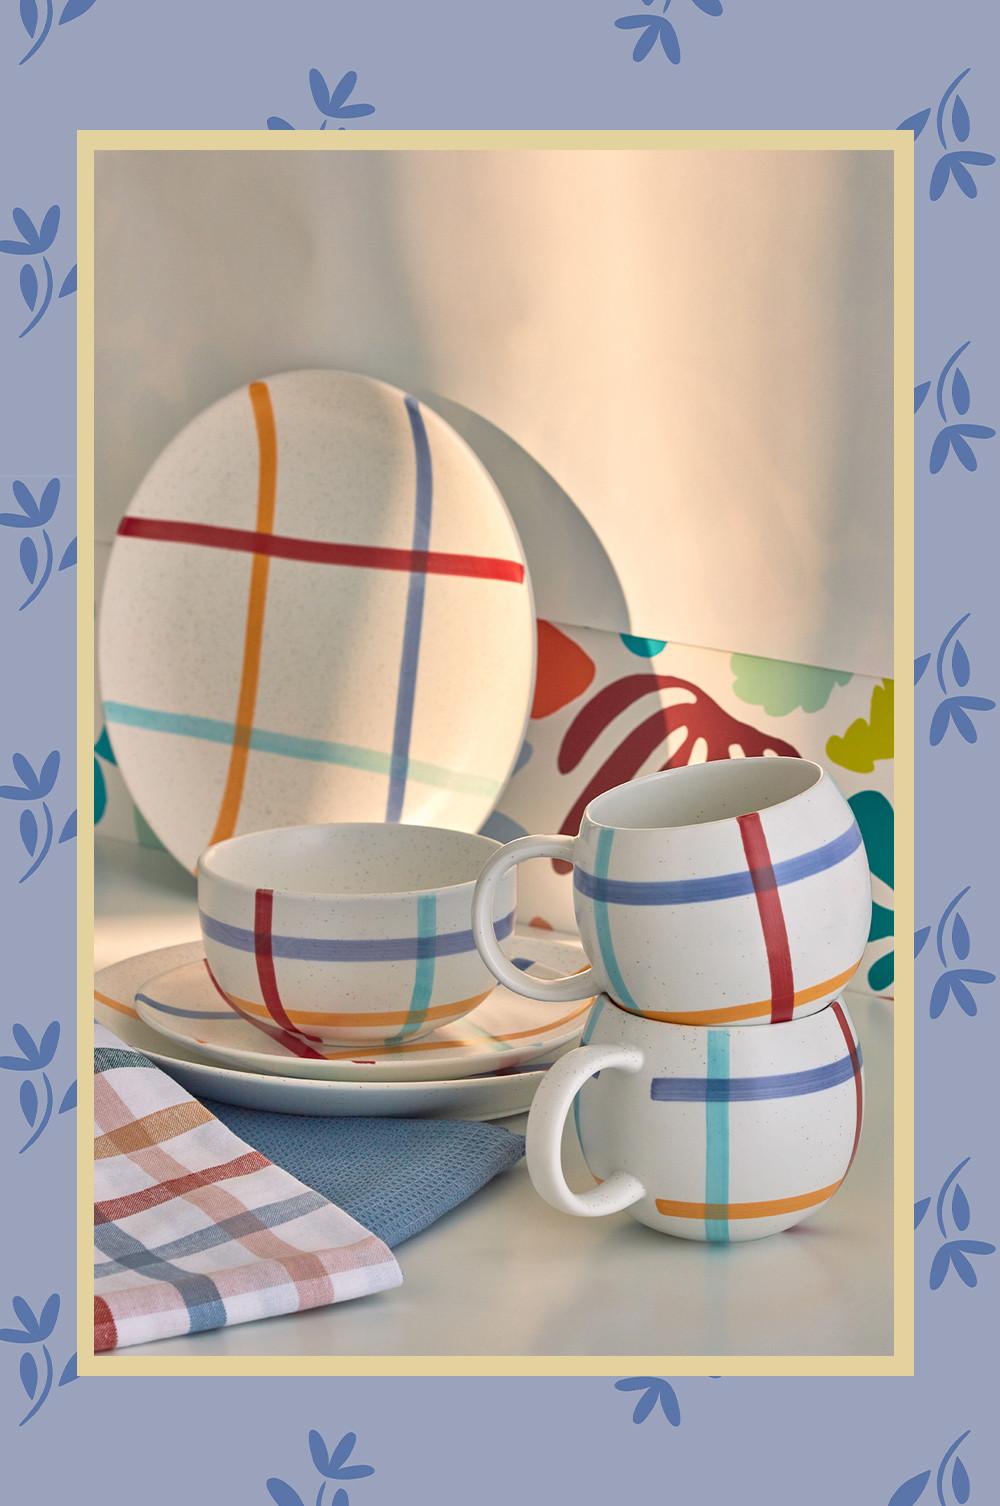 Chequered tableware